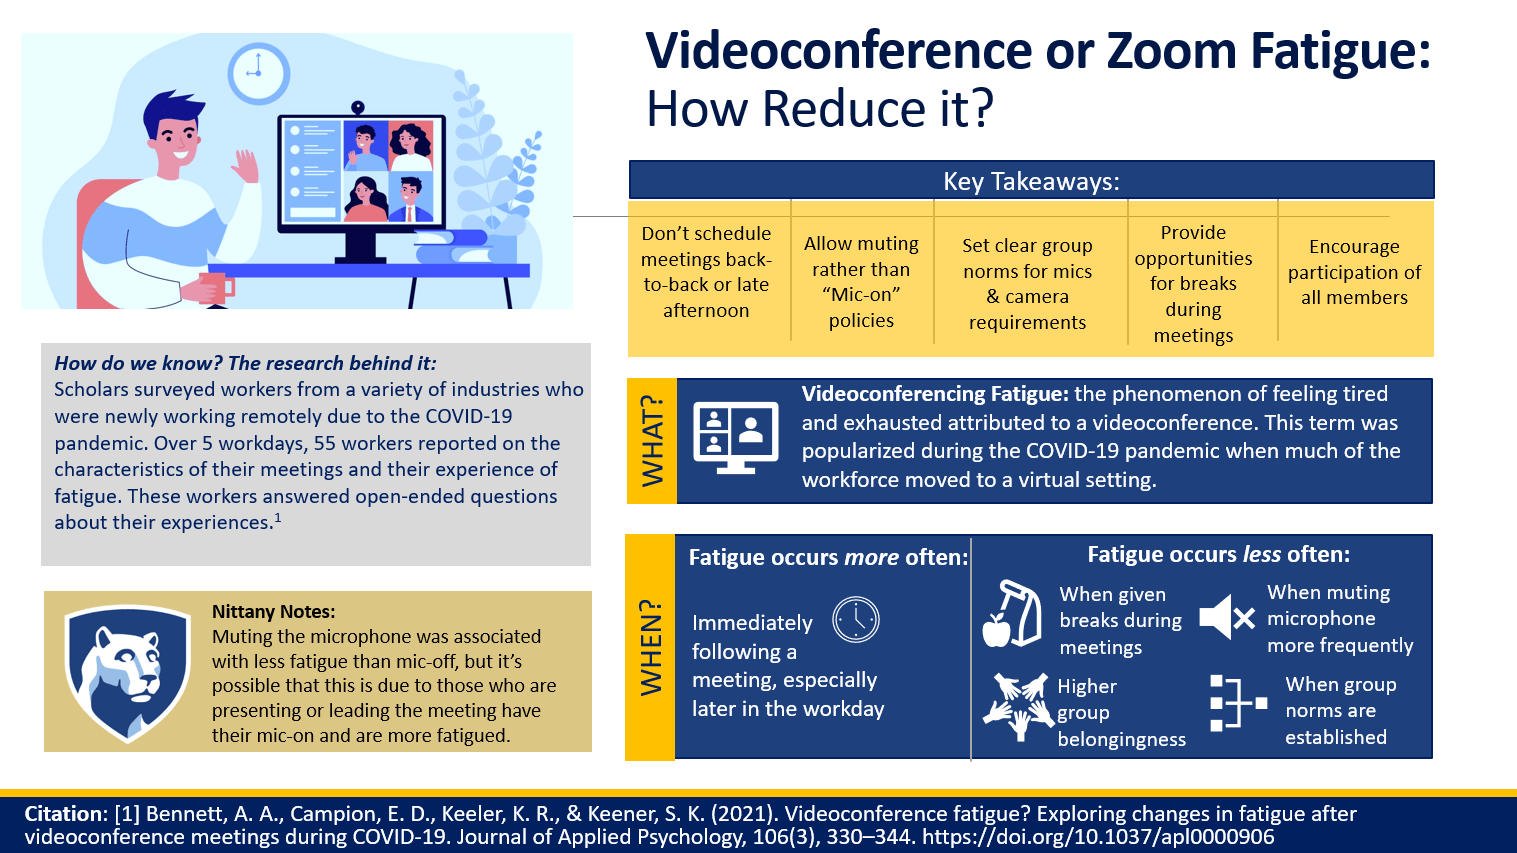 How to Reduce Zoom Fatigue: Don't schedule meetings back-to-back. Allow people to remain muted. Set clear group mic and camera norms. Provide breaks! Don't schedule meetings in the late afternoon. Encourage everyone to participate. 